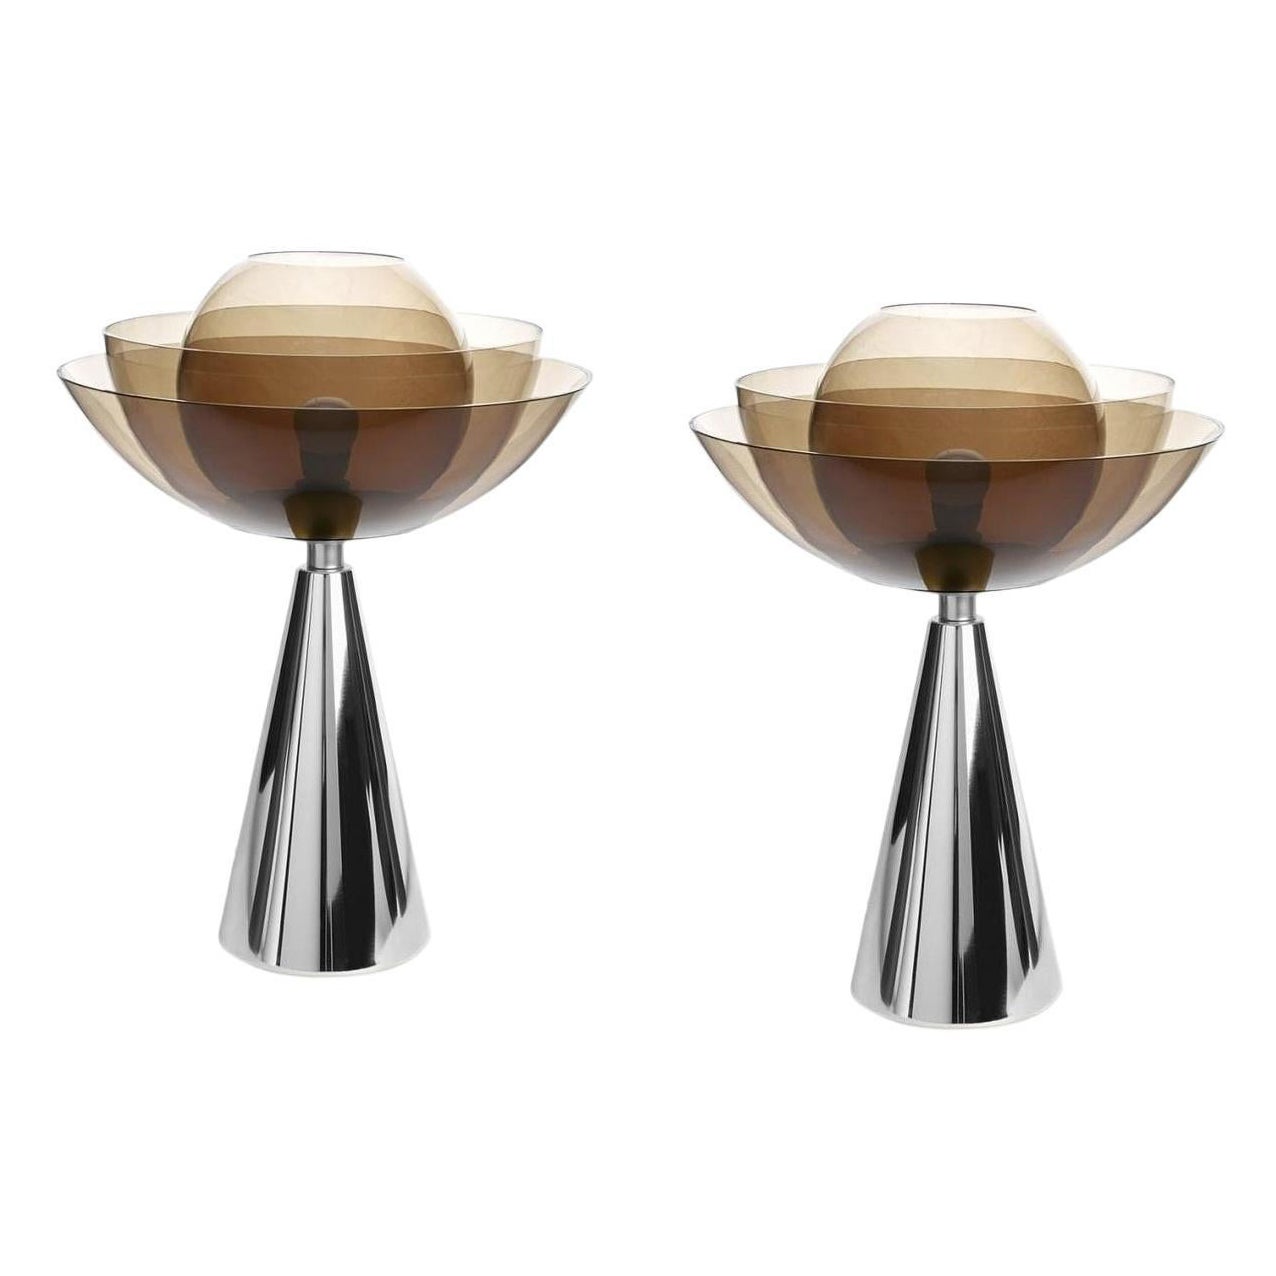 Pair of Lotus Table Lamps by Mason Editions For Sale